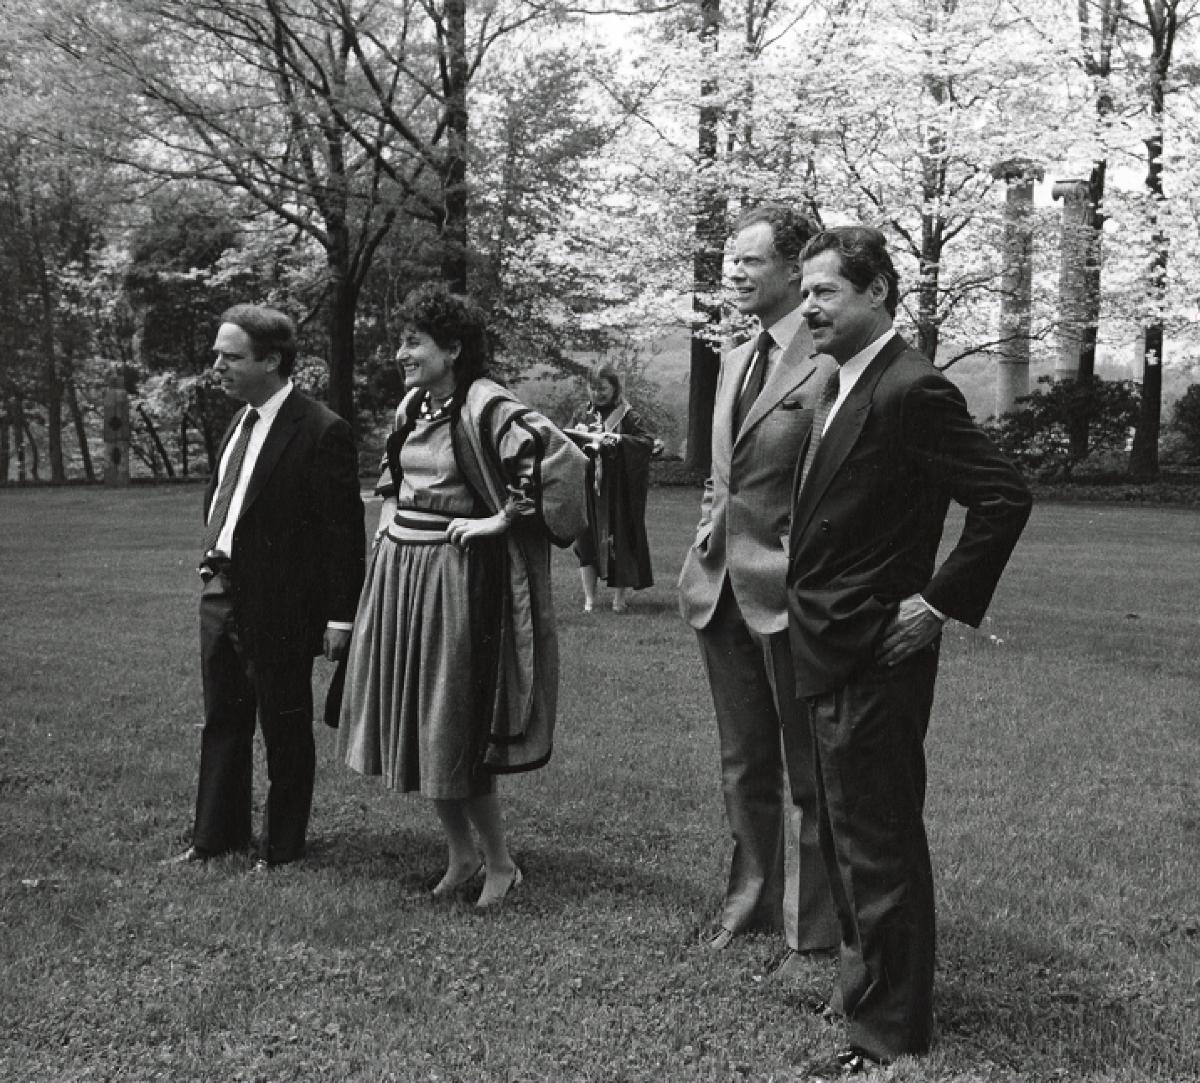 Howard and Jean Lipman Collection, May 21 – October 31, 1986 (Exhibit opening with David R. Collens, Cynthia Hazen Polsky, J. Carter Brown, and H. Peter Stern)